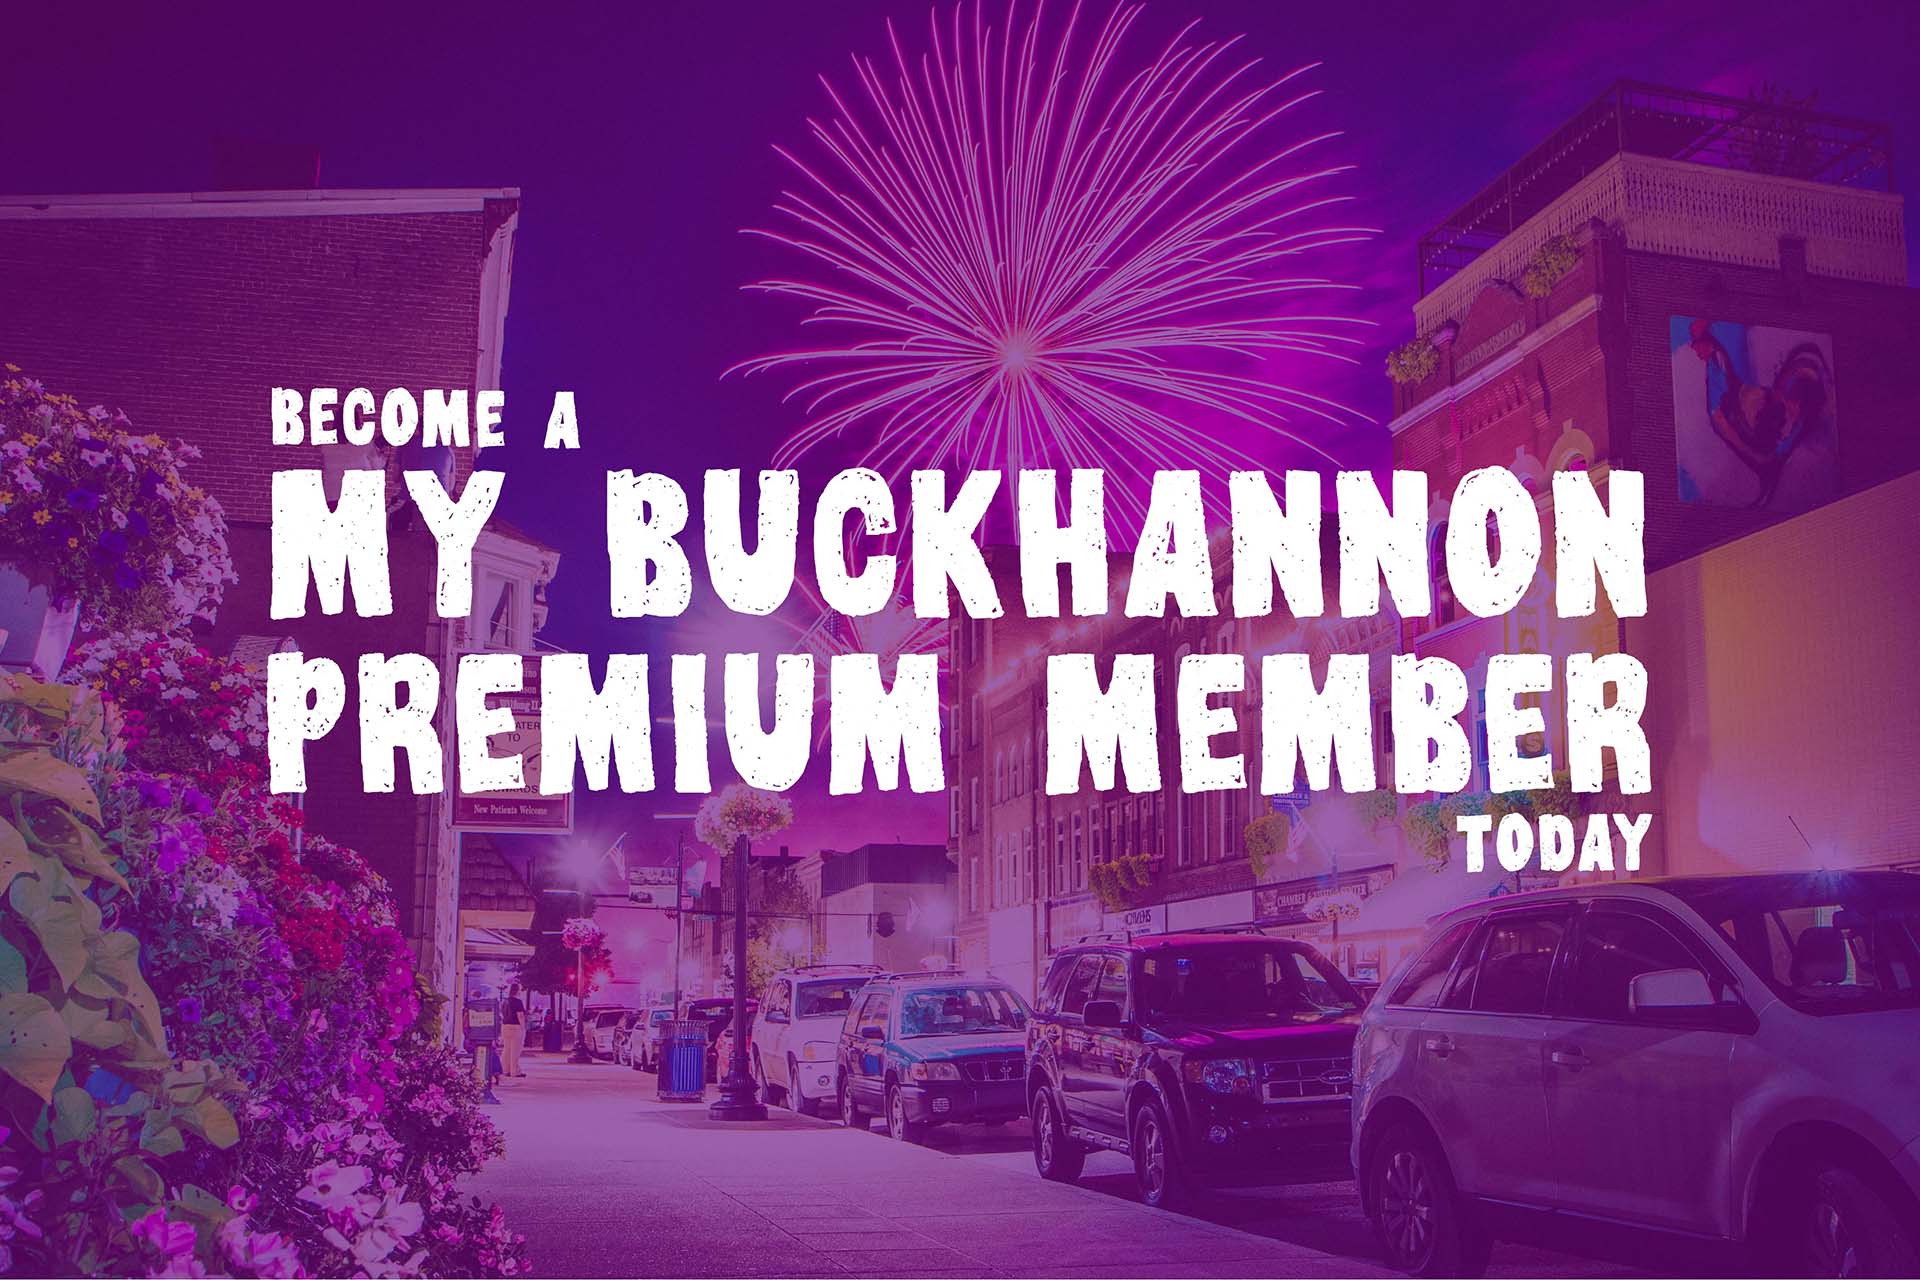 Become a My Buckhannon premium member